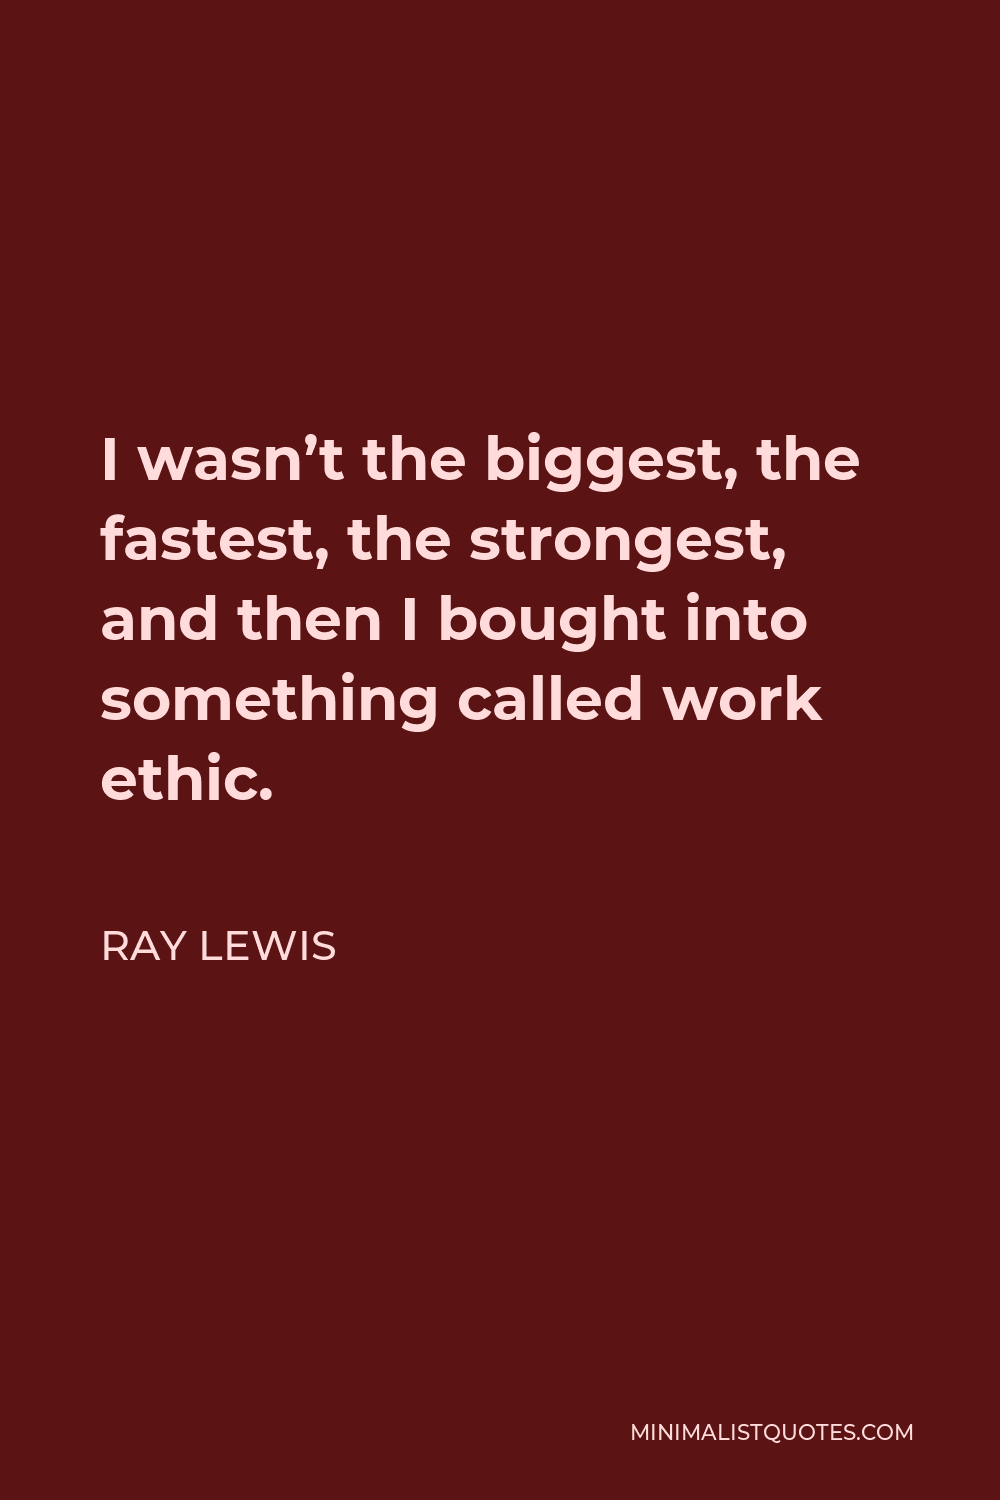 Ray Lewis Quote - I wasn’t the biggest, the fastest, the strongest, and then I bought into something called work ethic.